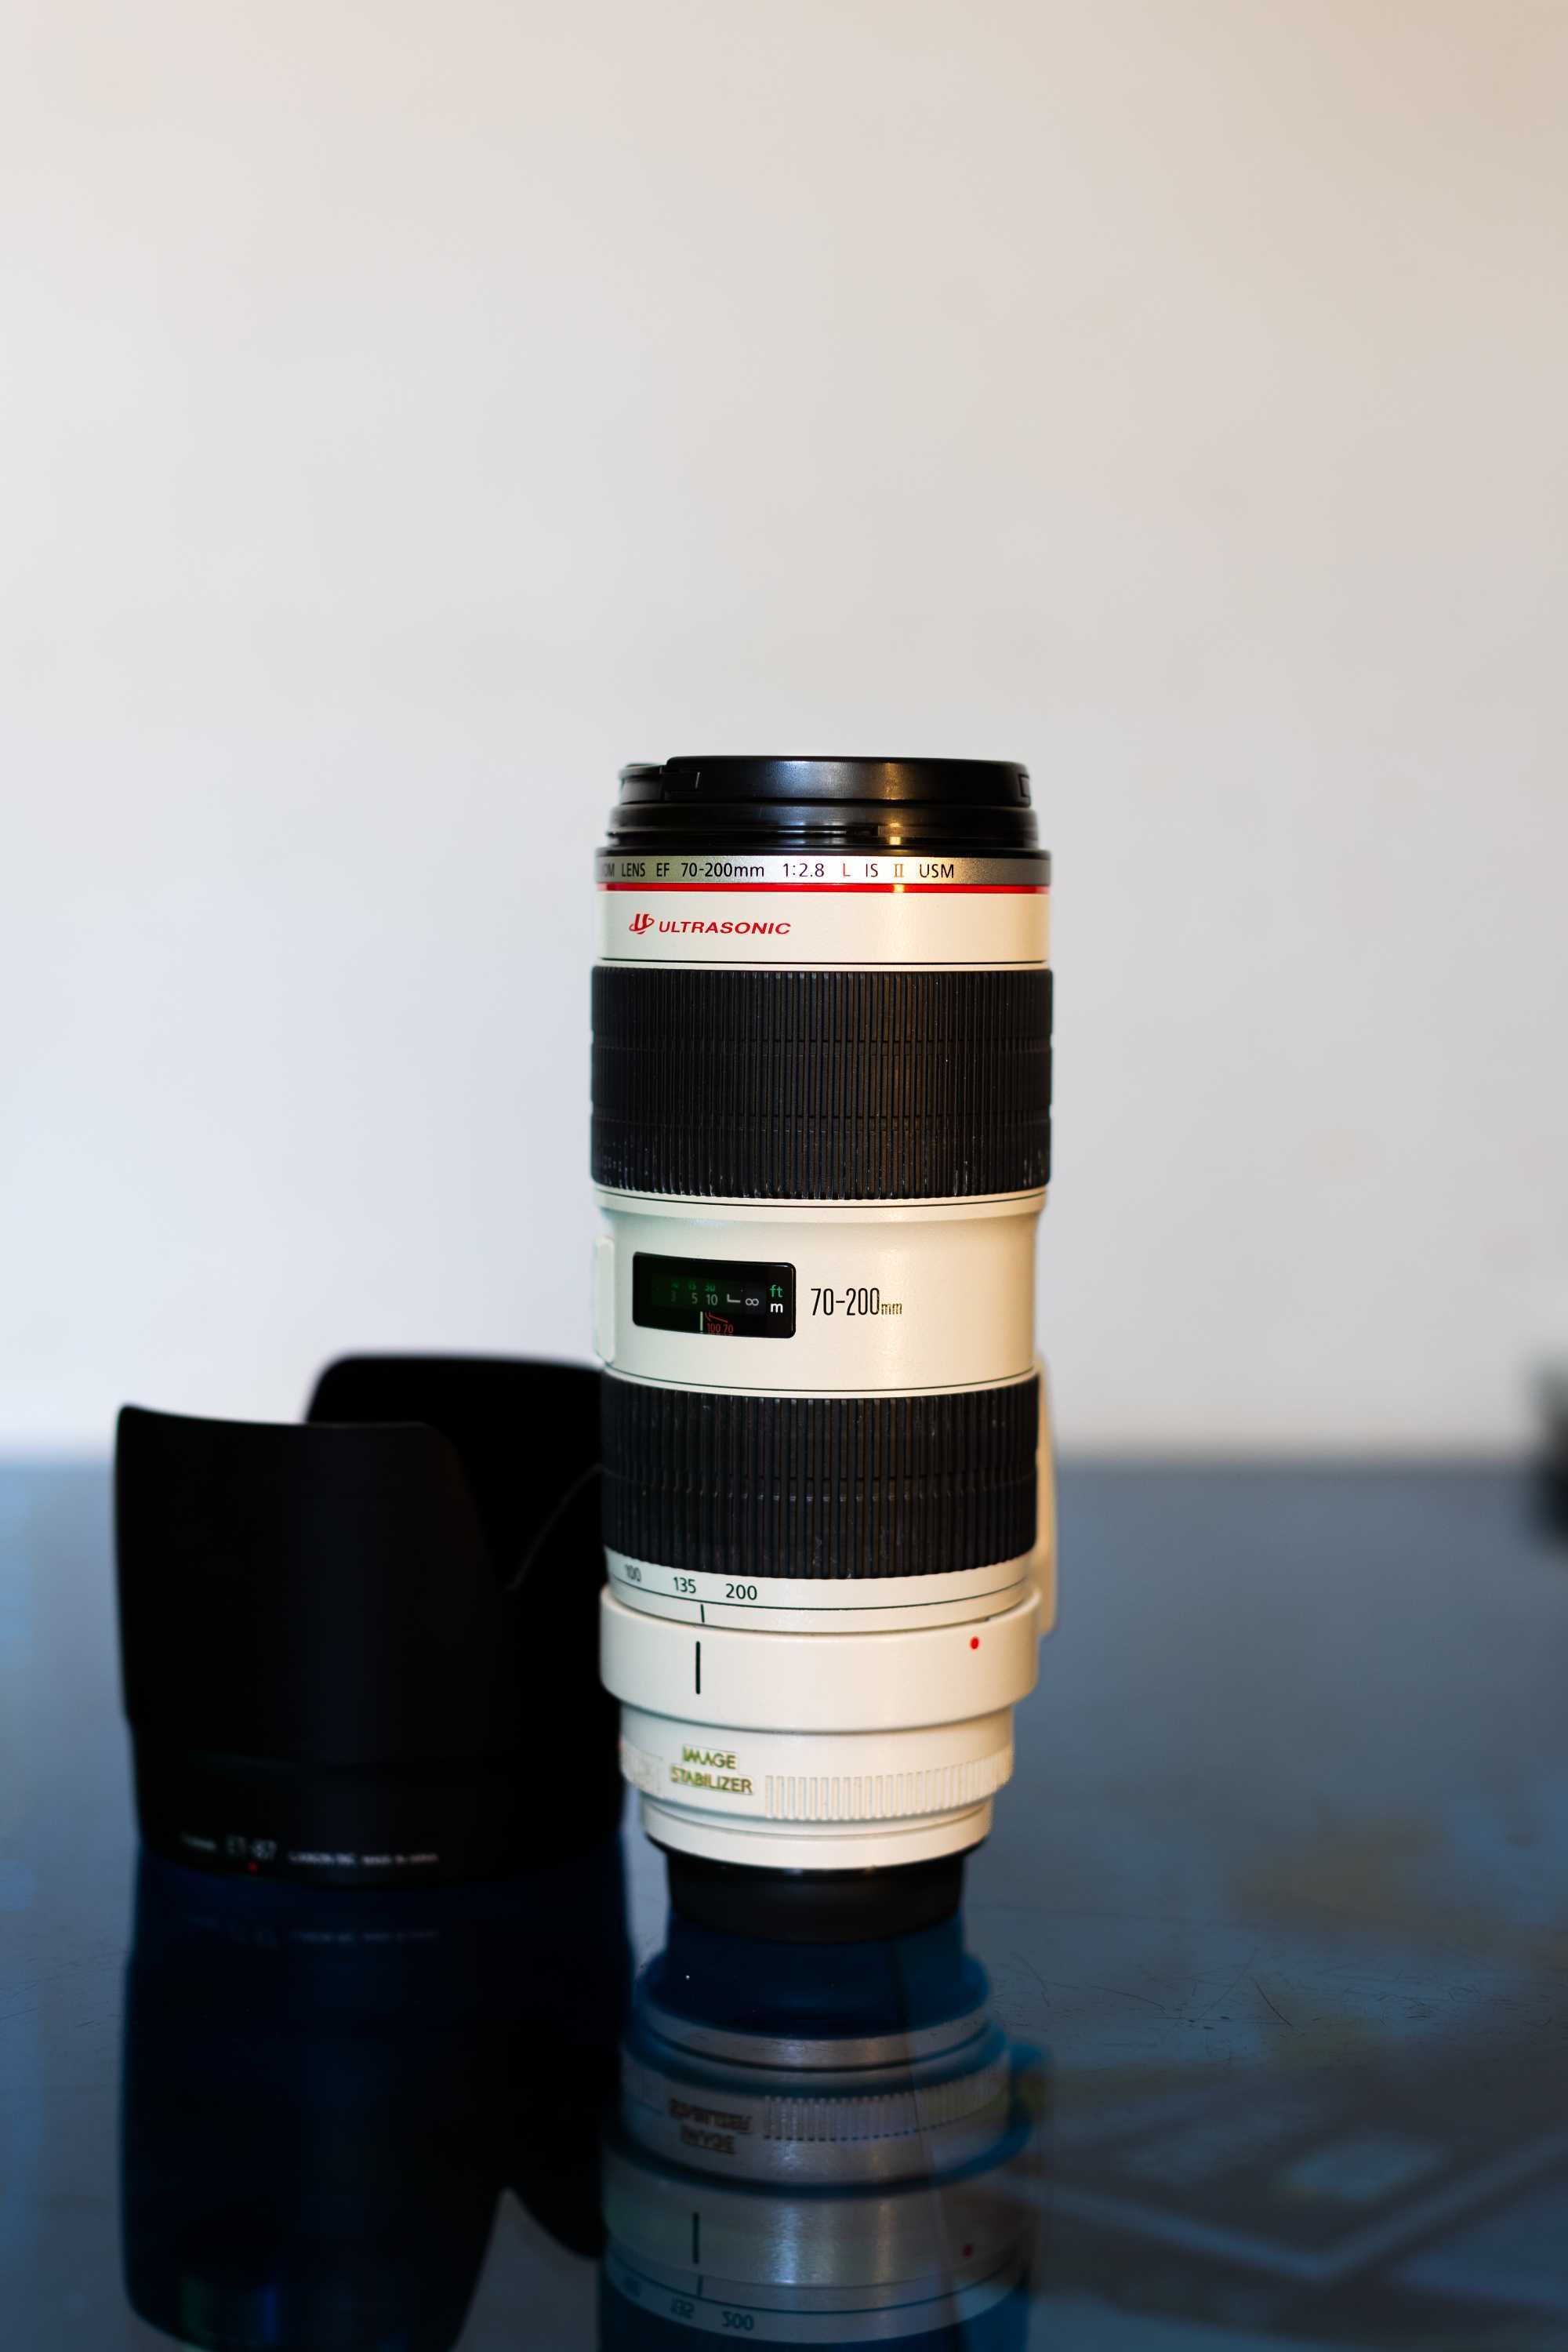 Canon EF 70-200mm f2.8
L IS II USM